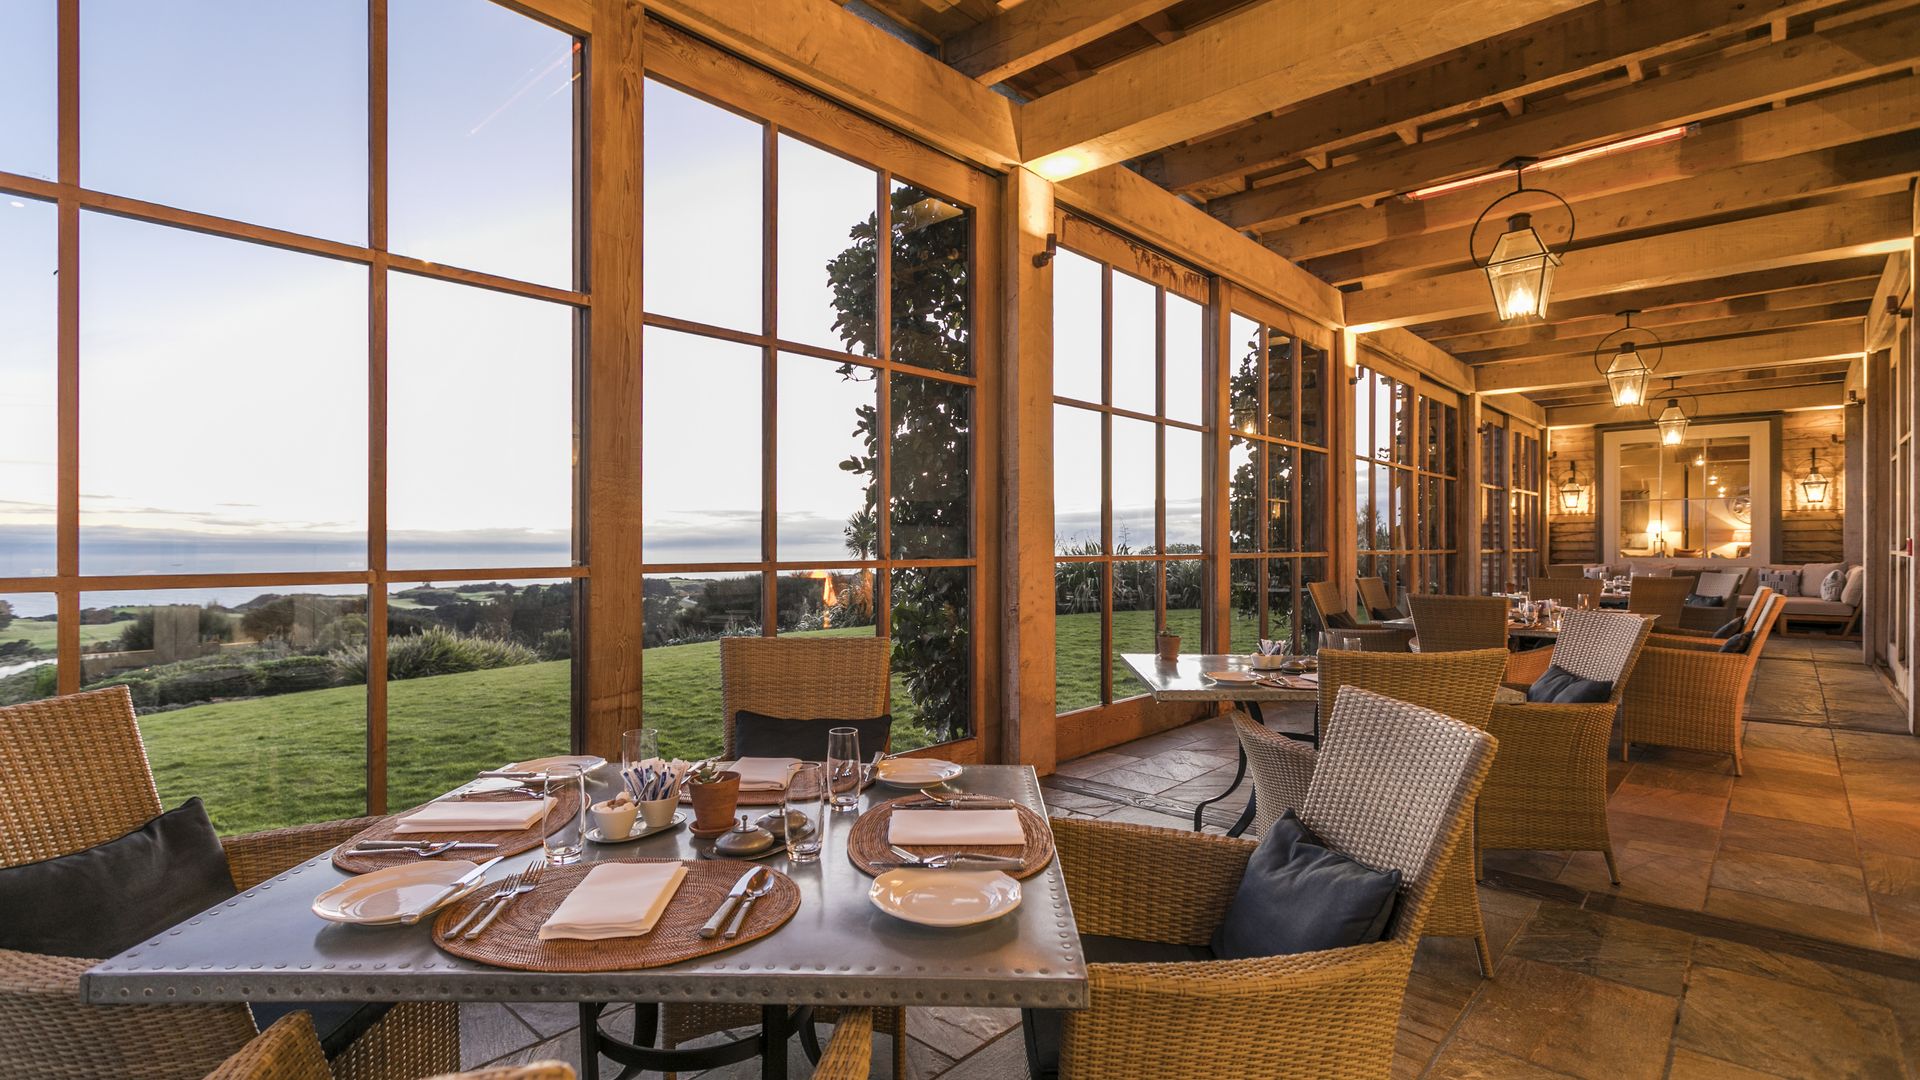 Displaying the fine dining space at Cape Kidnappers, Hawke's Bay, New Zealand